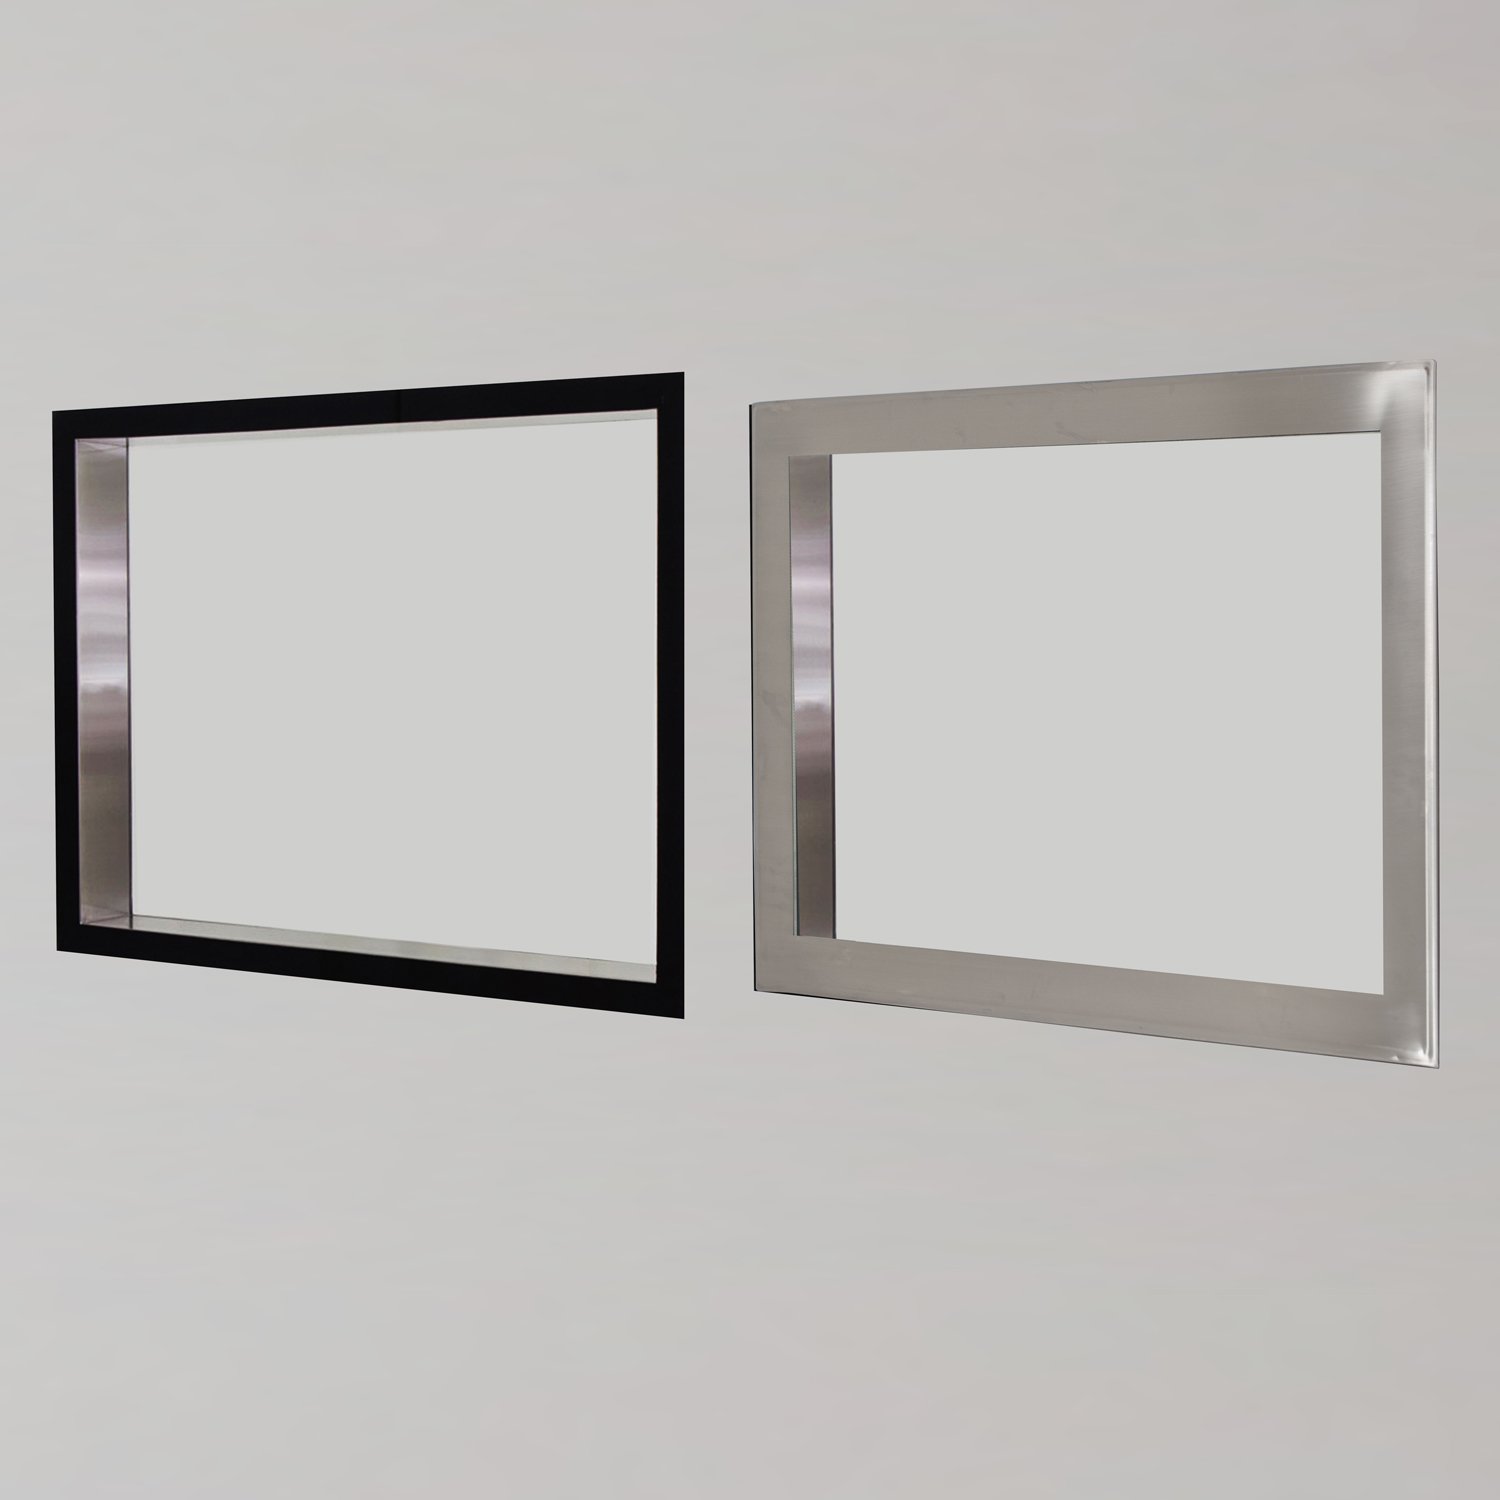 Window-Comparison-stainless-steel-door-half-full-view-panel-automatic-window-size-HV8A4890-101819